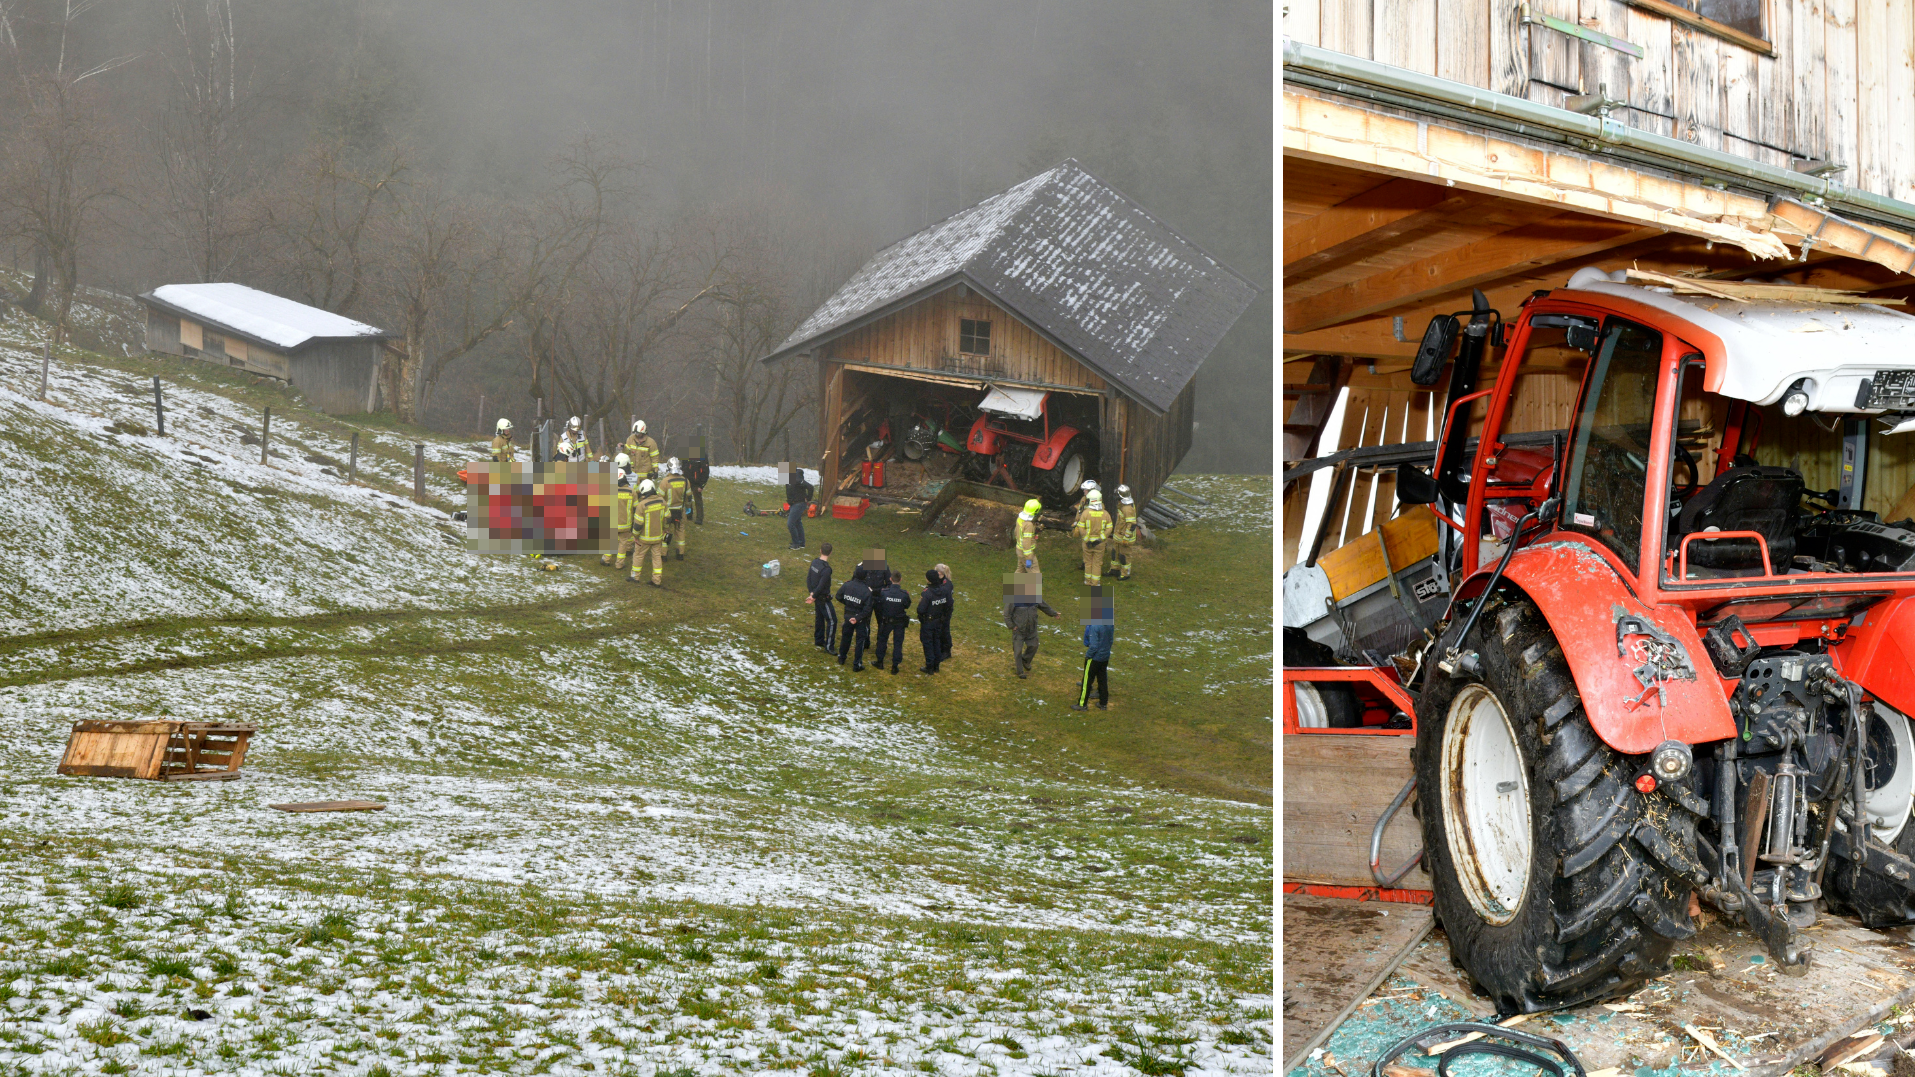 The tractor raced across the steep, snow-covered meadow into the shed, which slowed it down. (Bild: zoom.tirol, Krone KREATIV)